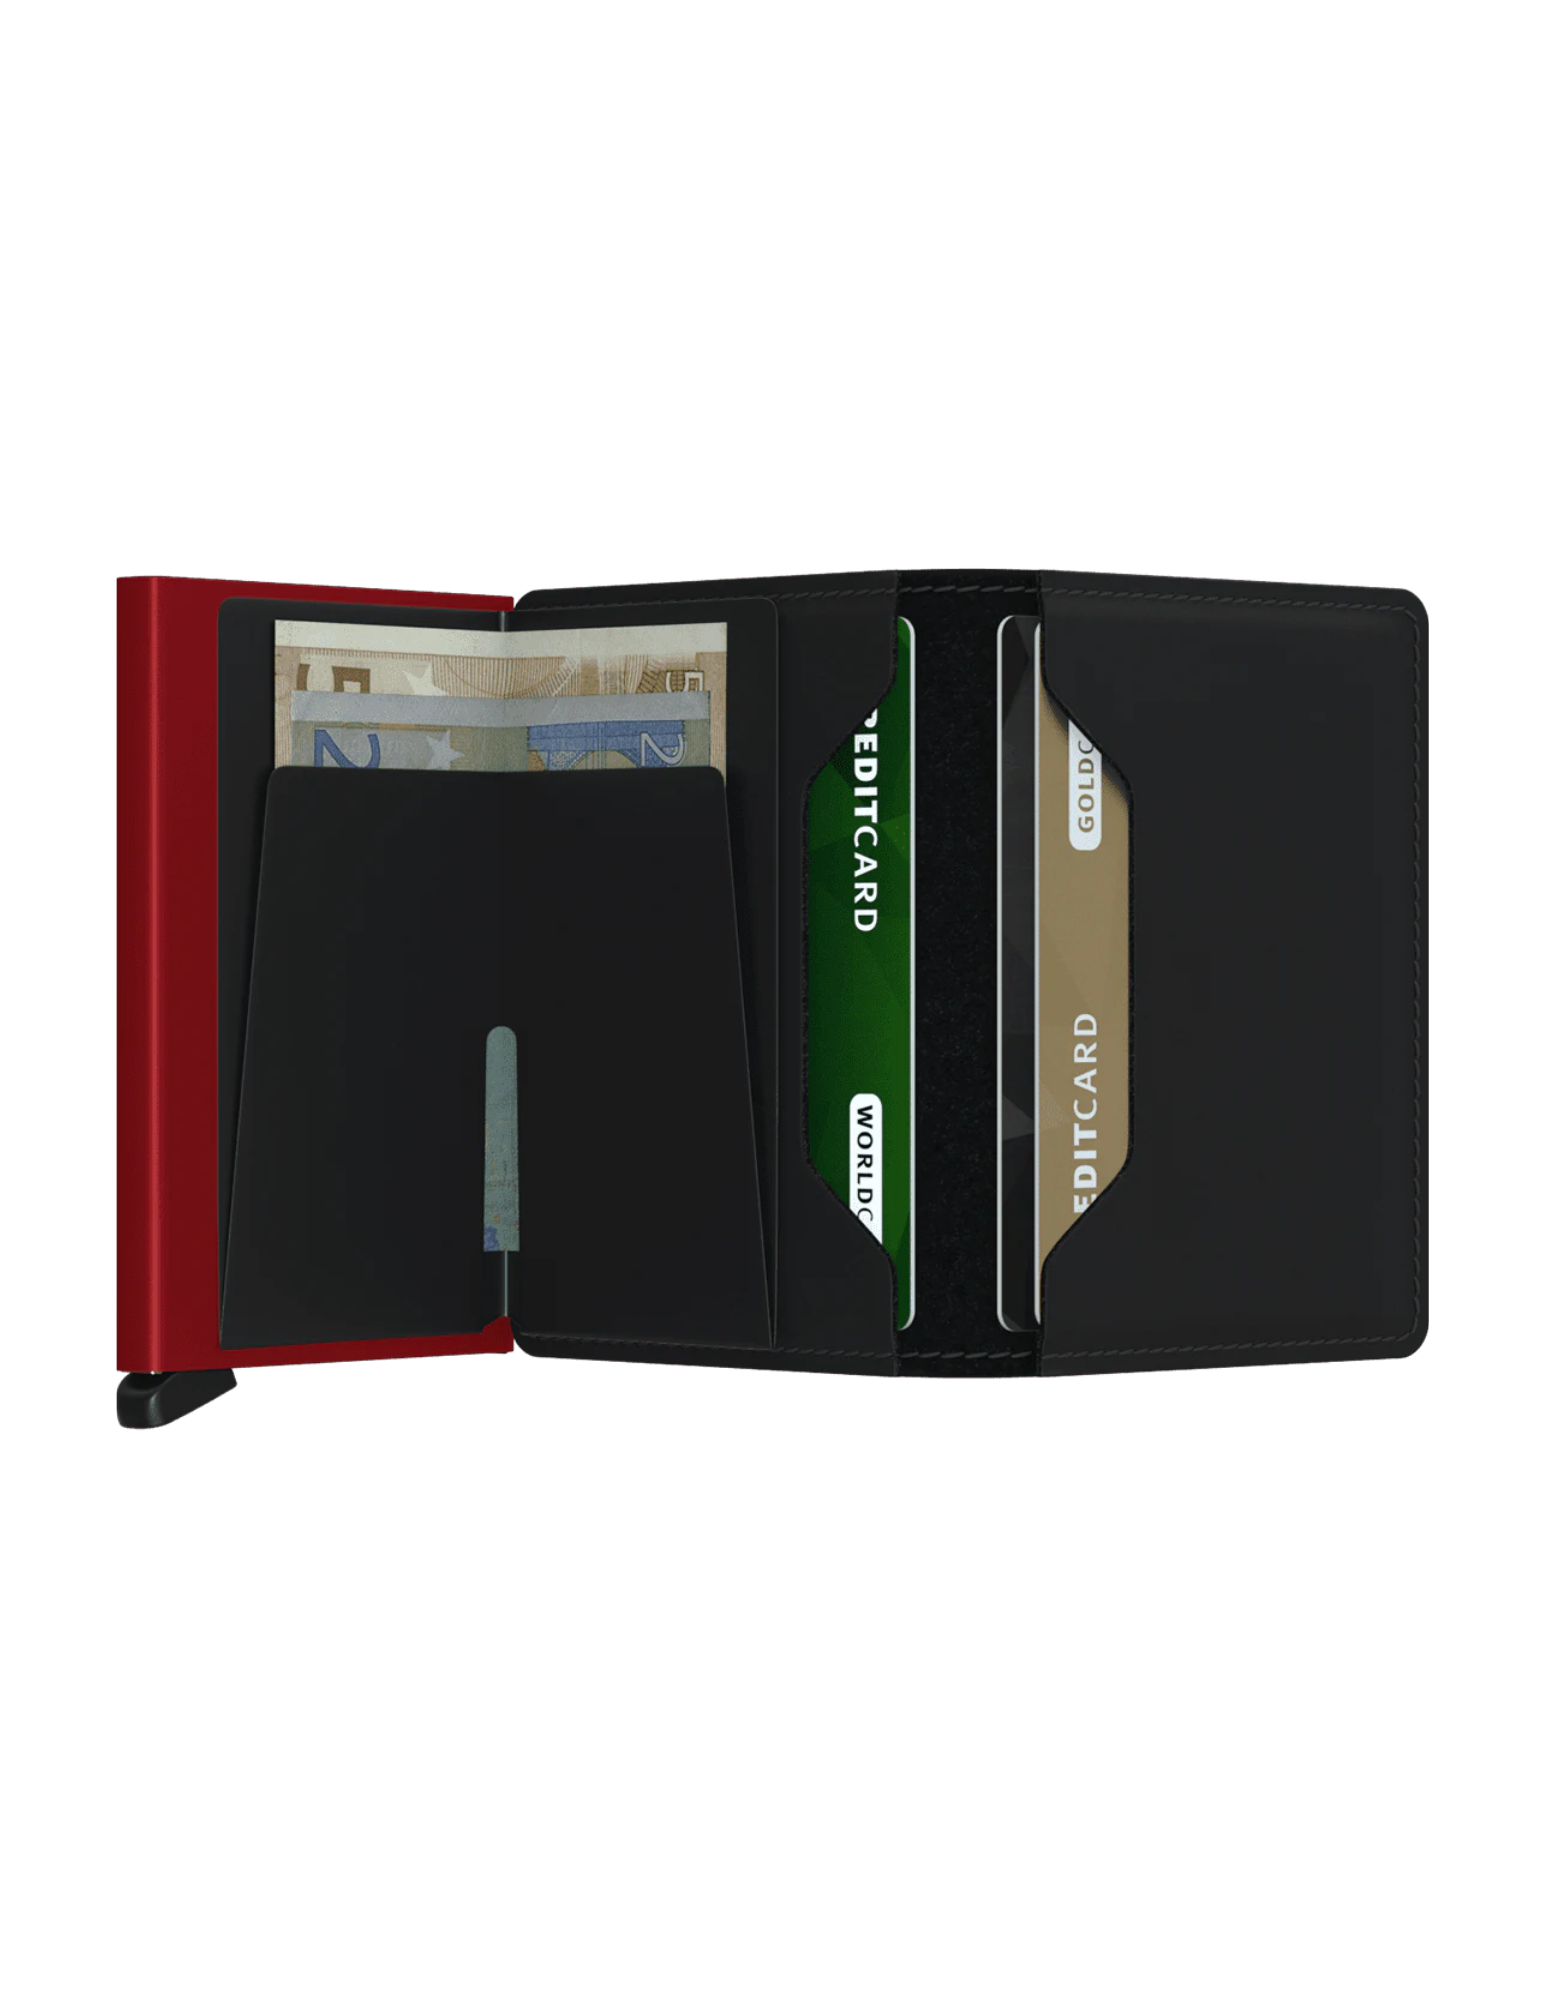 Its slim profile makes the Slimwallet fit perfectly into every pocket. The open exterior is cut extra wide to hold cards, banknotes and receipts. The Cardprotector mechanism allows you to slide out cards with one simple motion, while the aluminium protects your cards from bending, breaking and unwanted wireless communication.